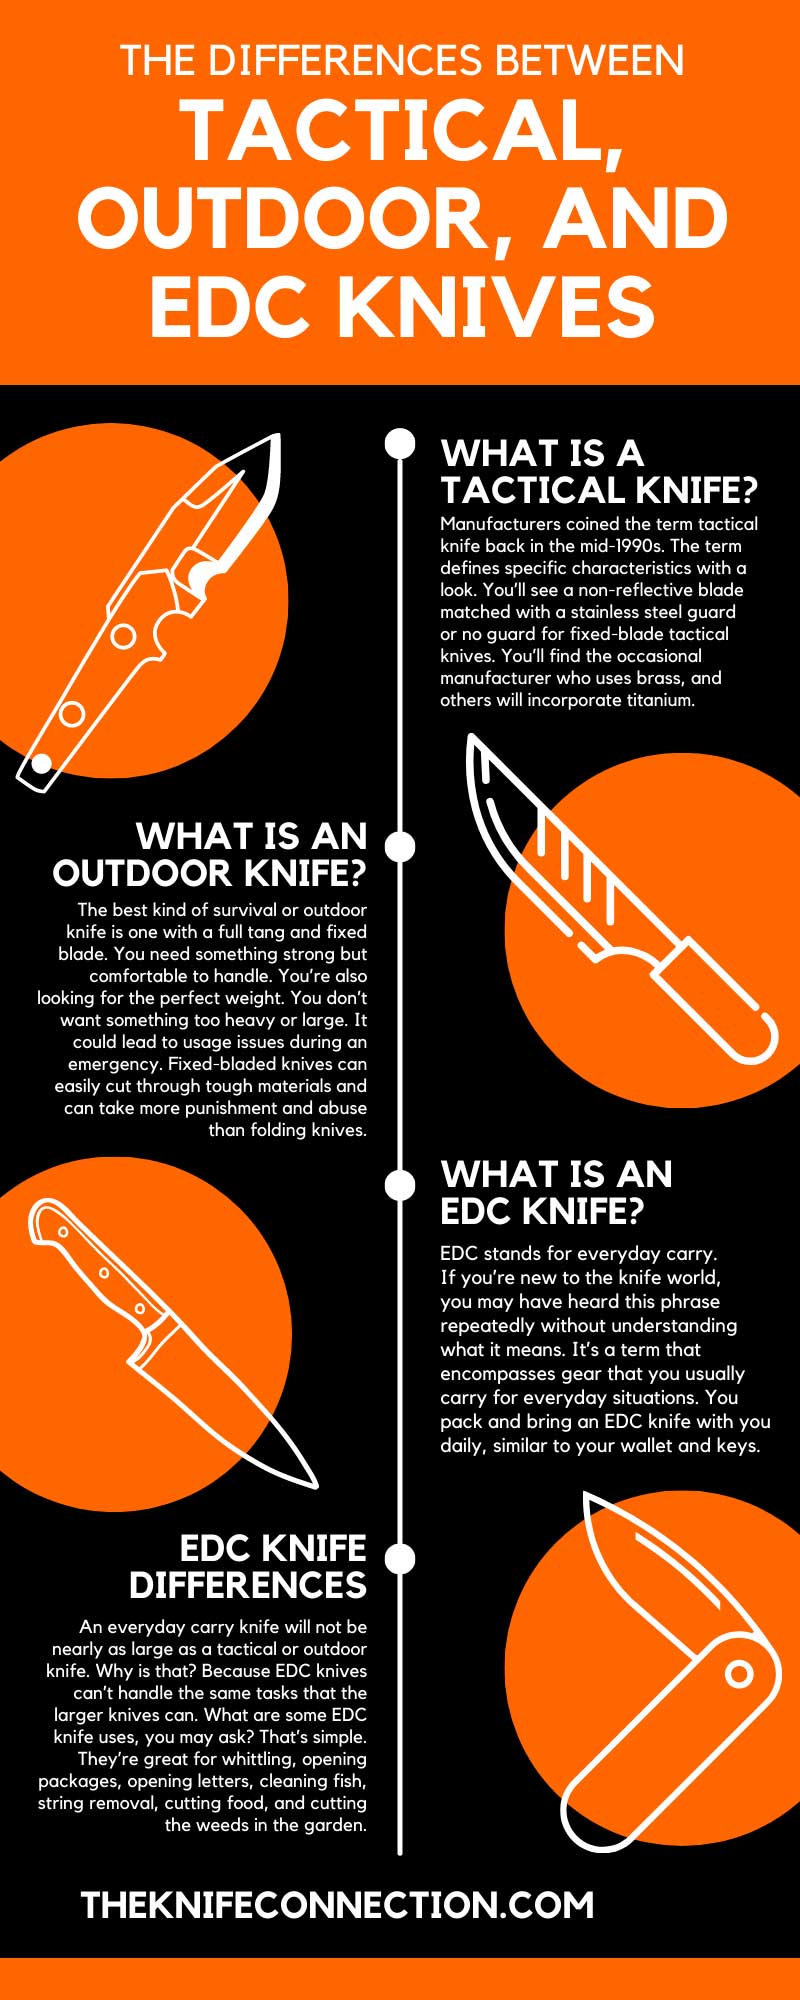 The Differences Between Tactical, Outdoor, and EDC Knives